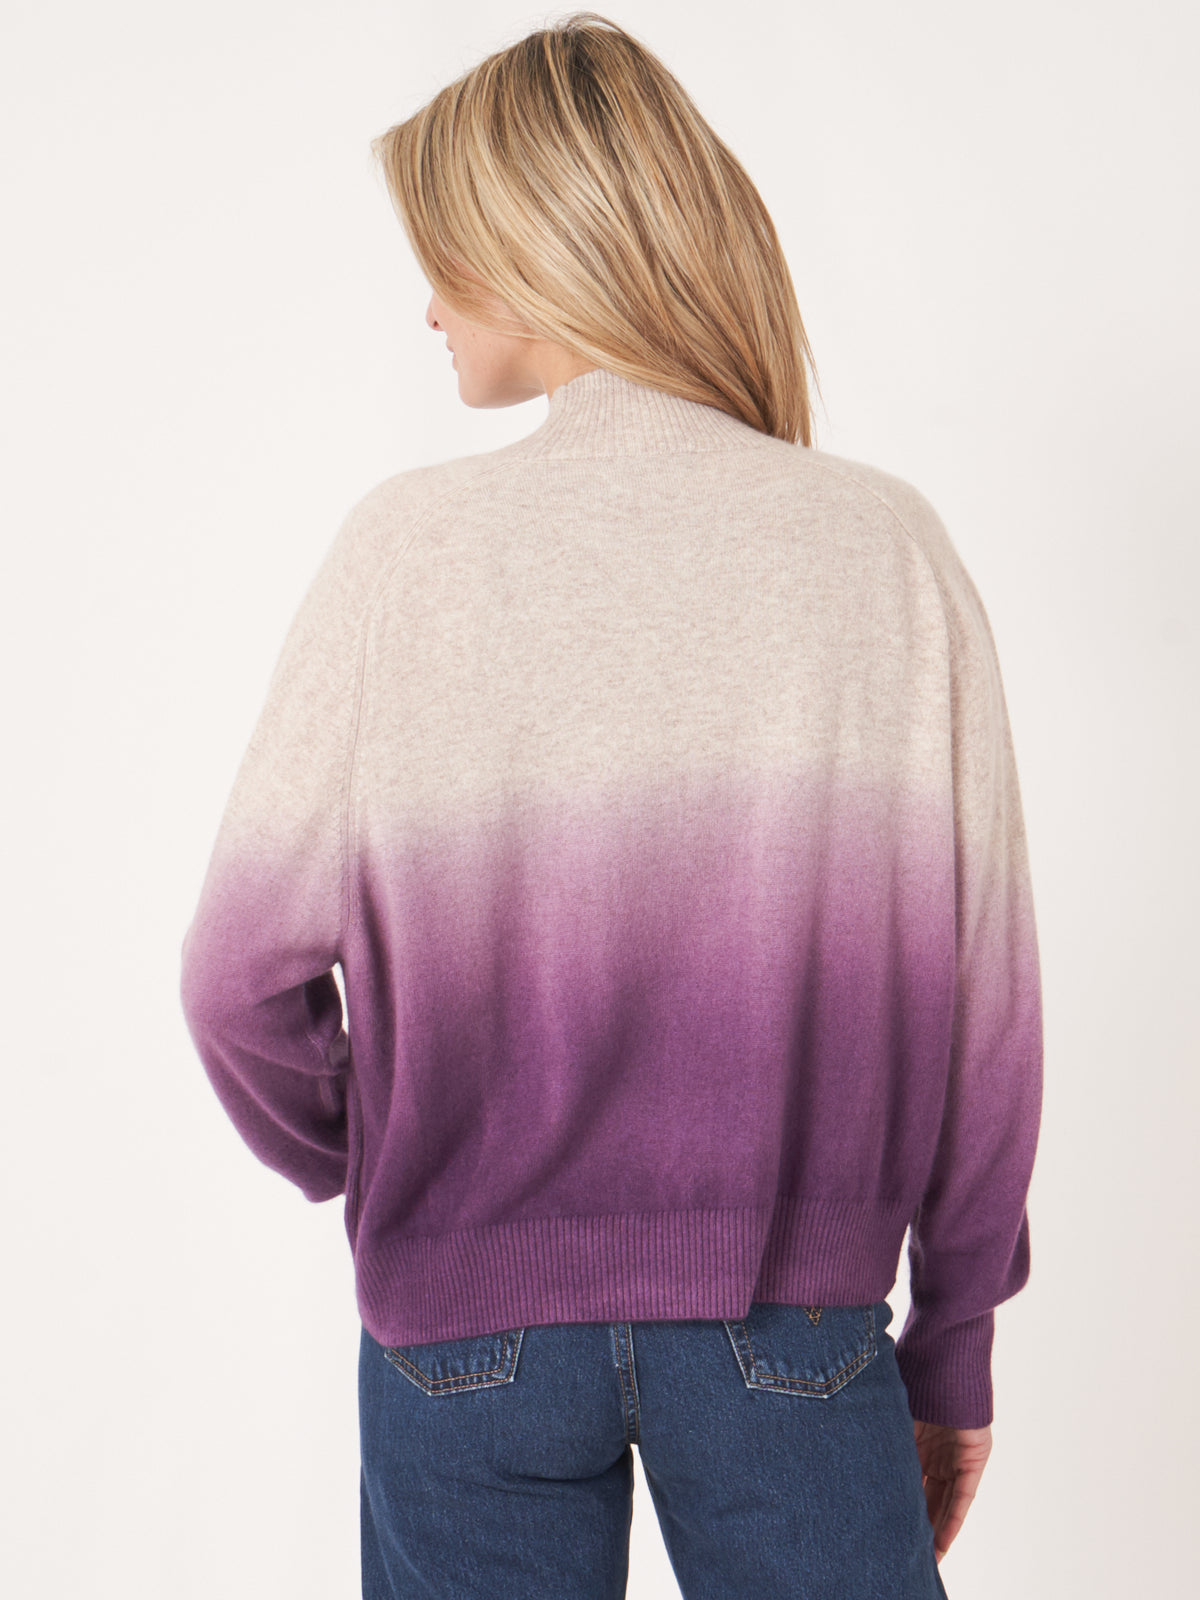 Repeat Dip Dye Cashmere Mock Neck Sweater